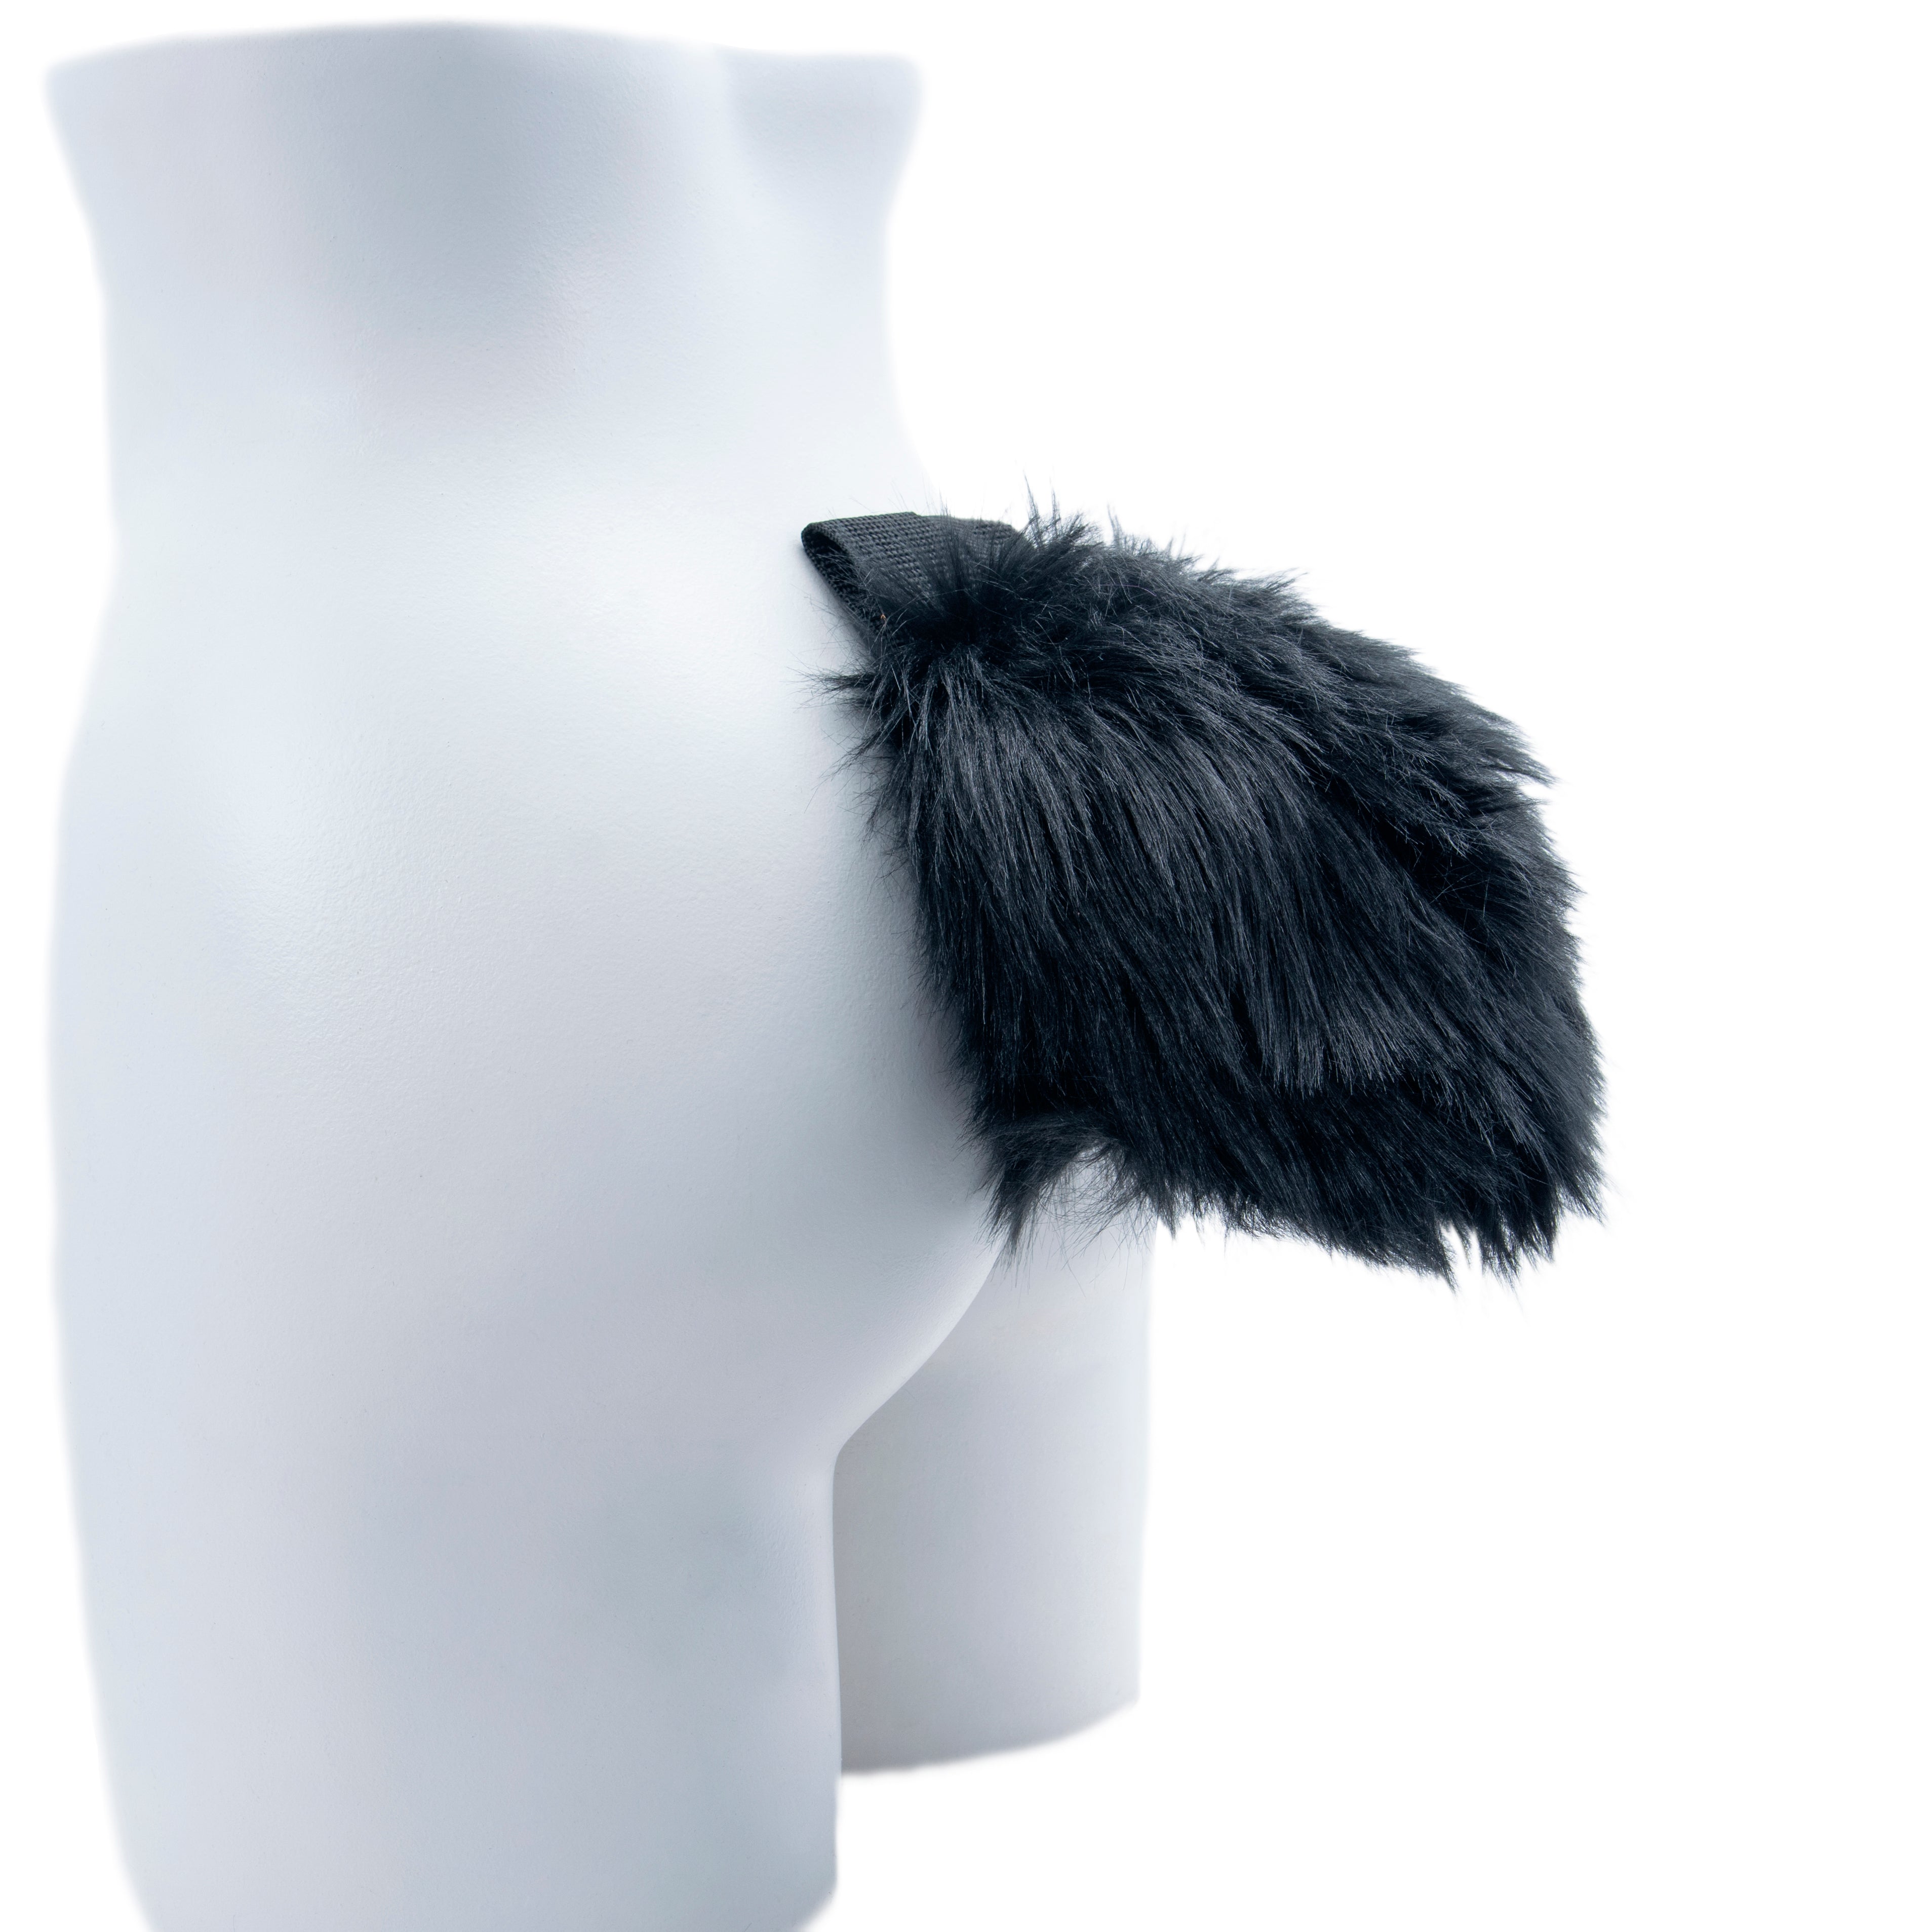 Bunny Tail faux fur rabbit furry fluffy partial fursuit halloween costume or hopps zootopia beastars cosplay accessory in black